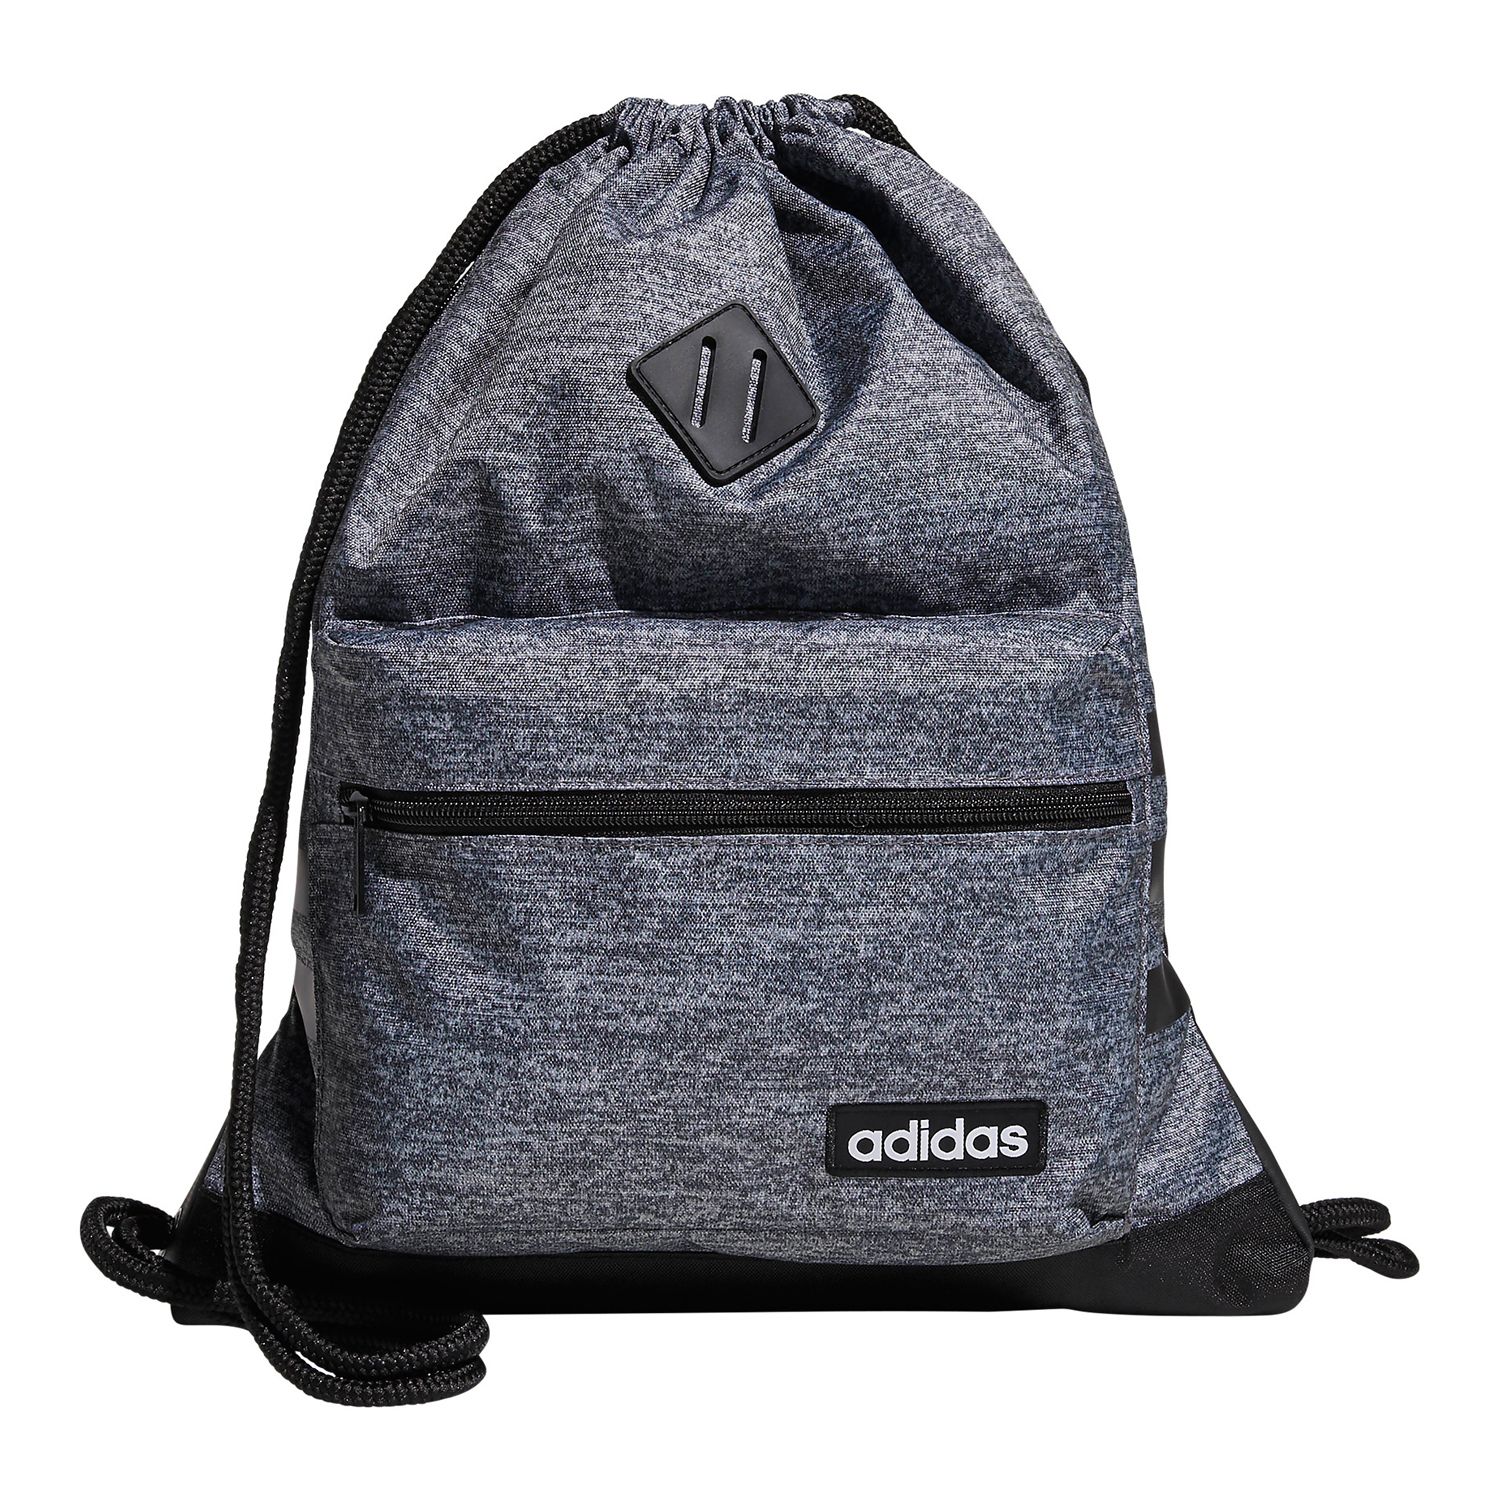 adidas classic 3s sackpack